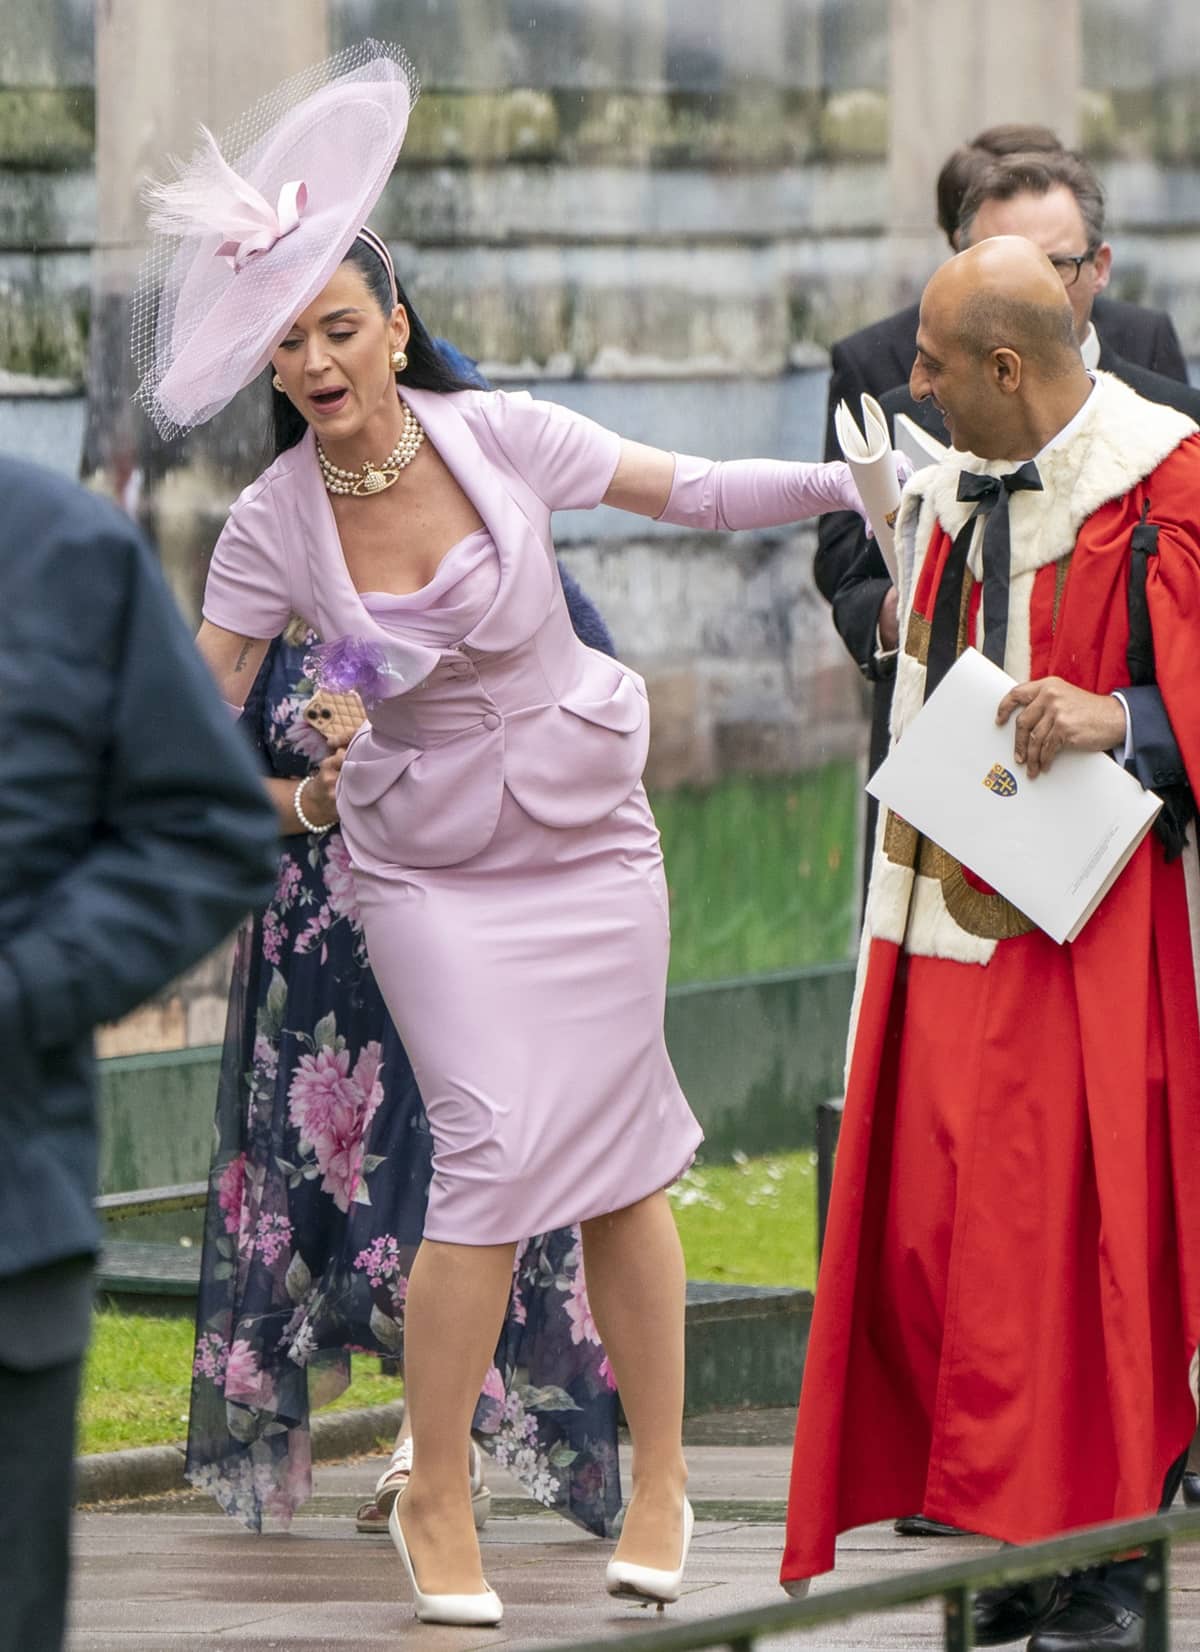 Katy Perry had a momentary slip-up while leaving the church after the Coronation of King Charles III and Queen Camilla